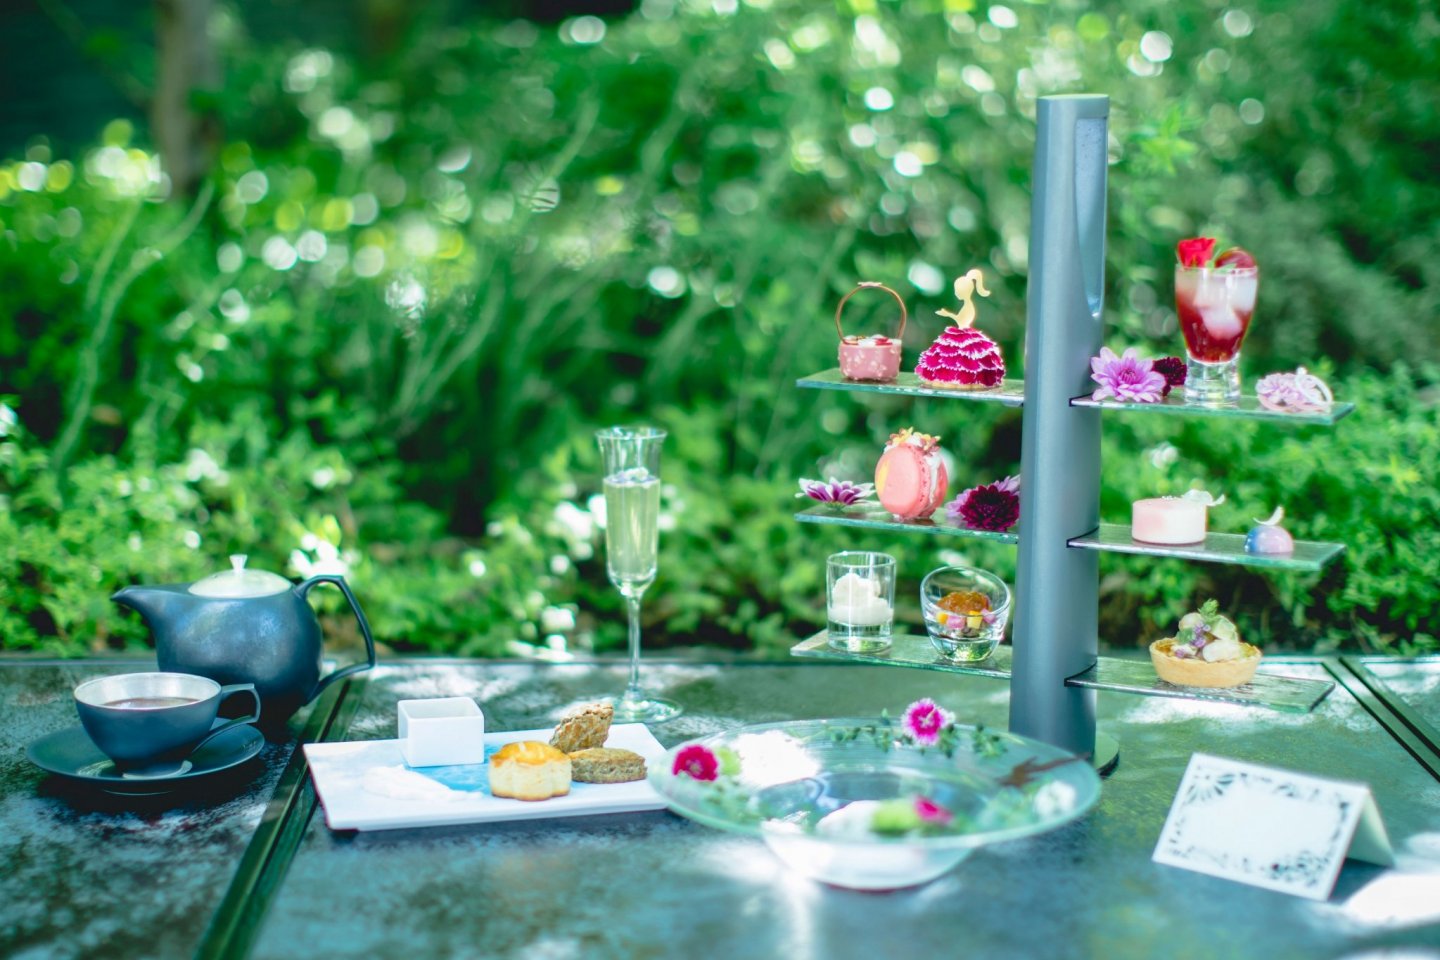 The whimsical-feeling afternoon tea